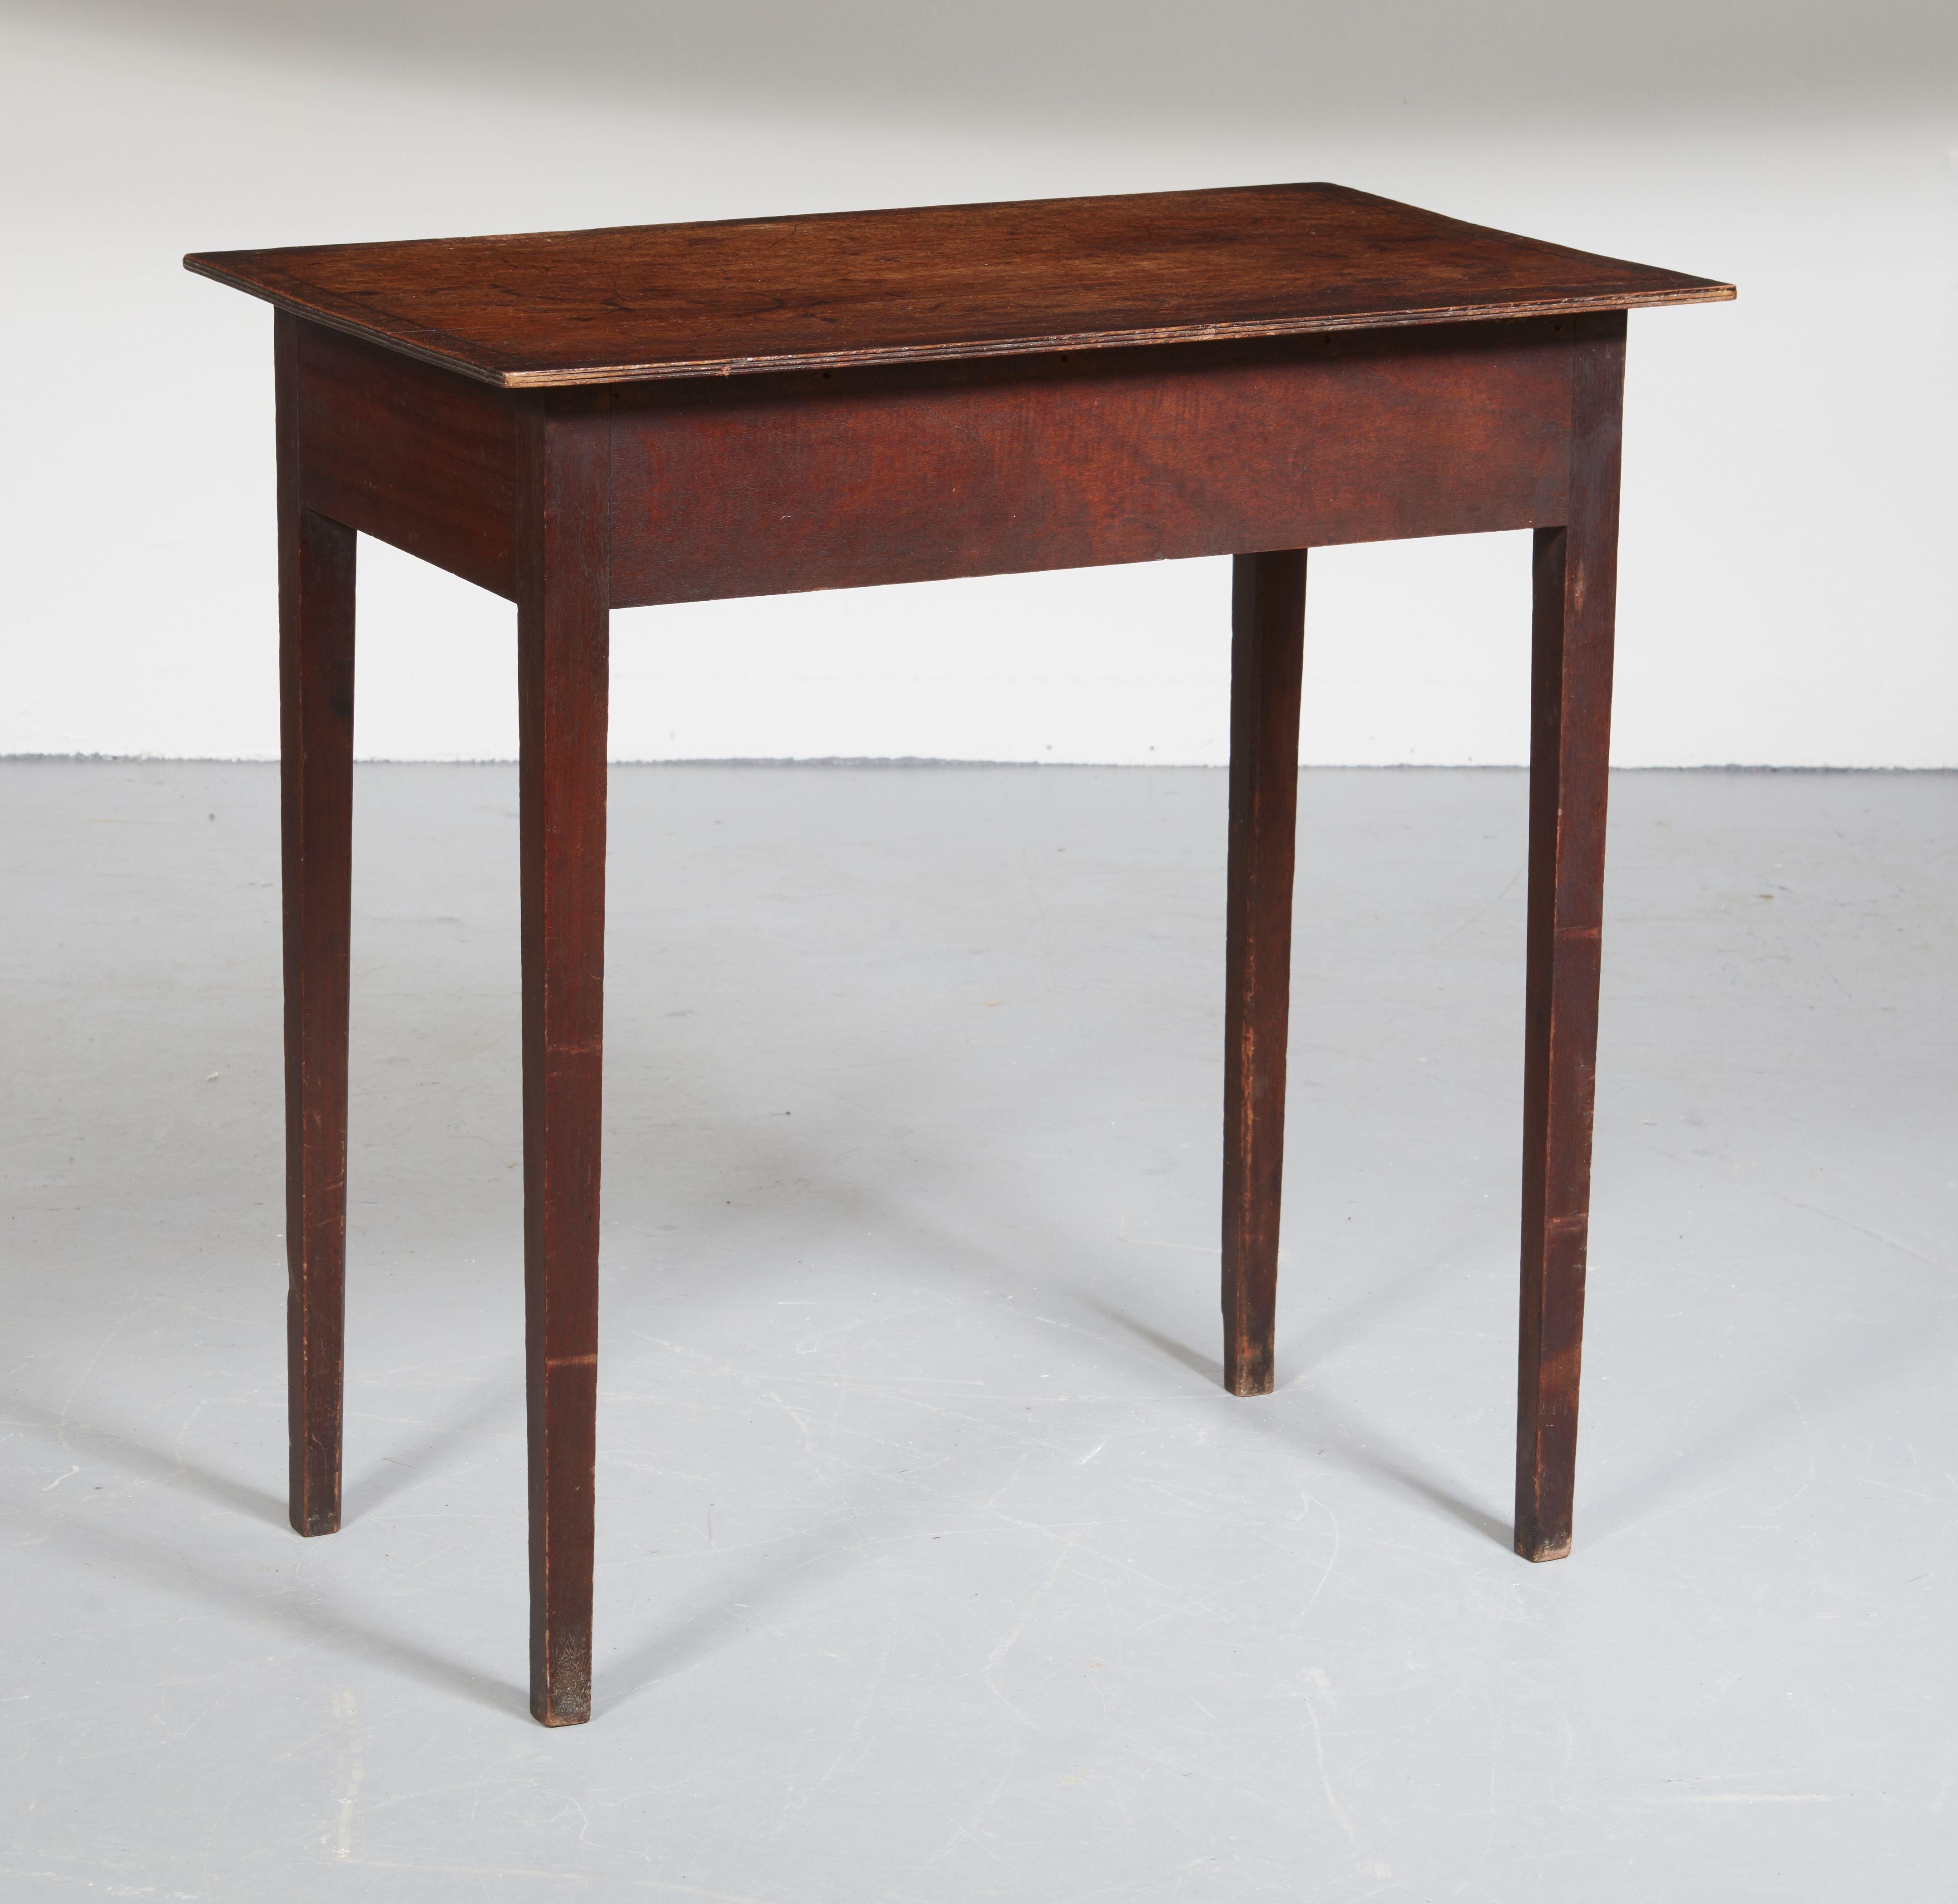 Early 19th Century English Country Inlaid Side Table